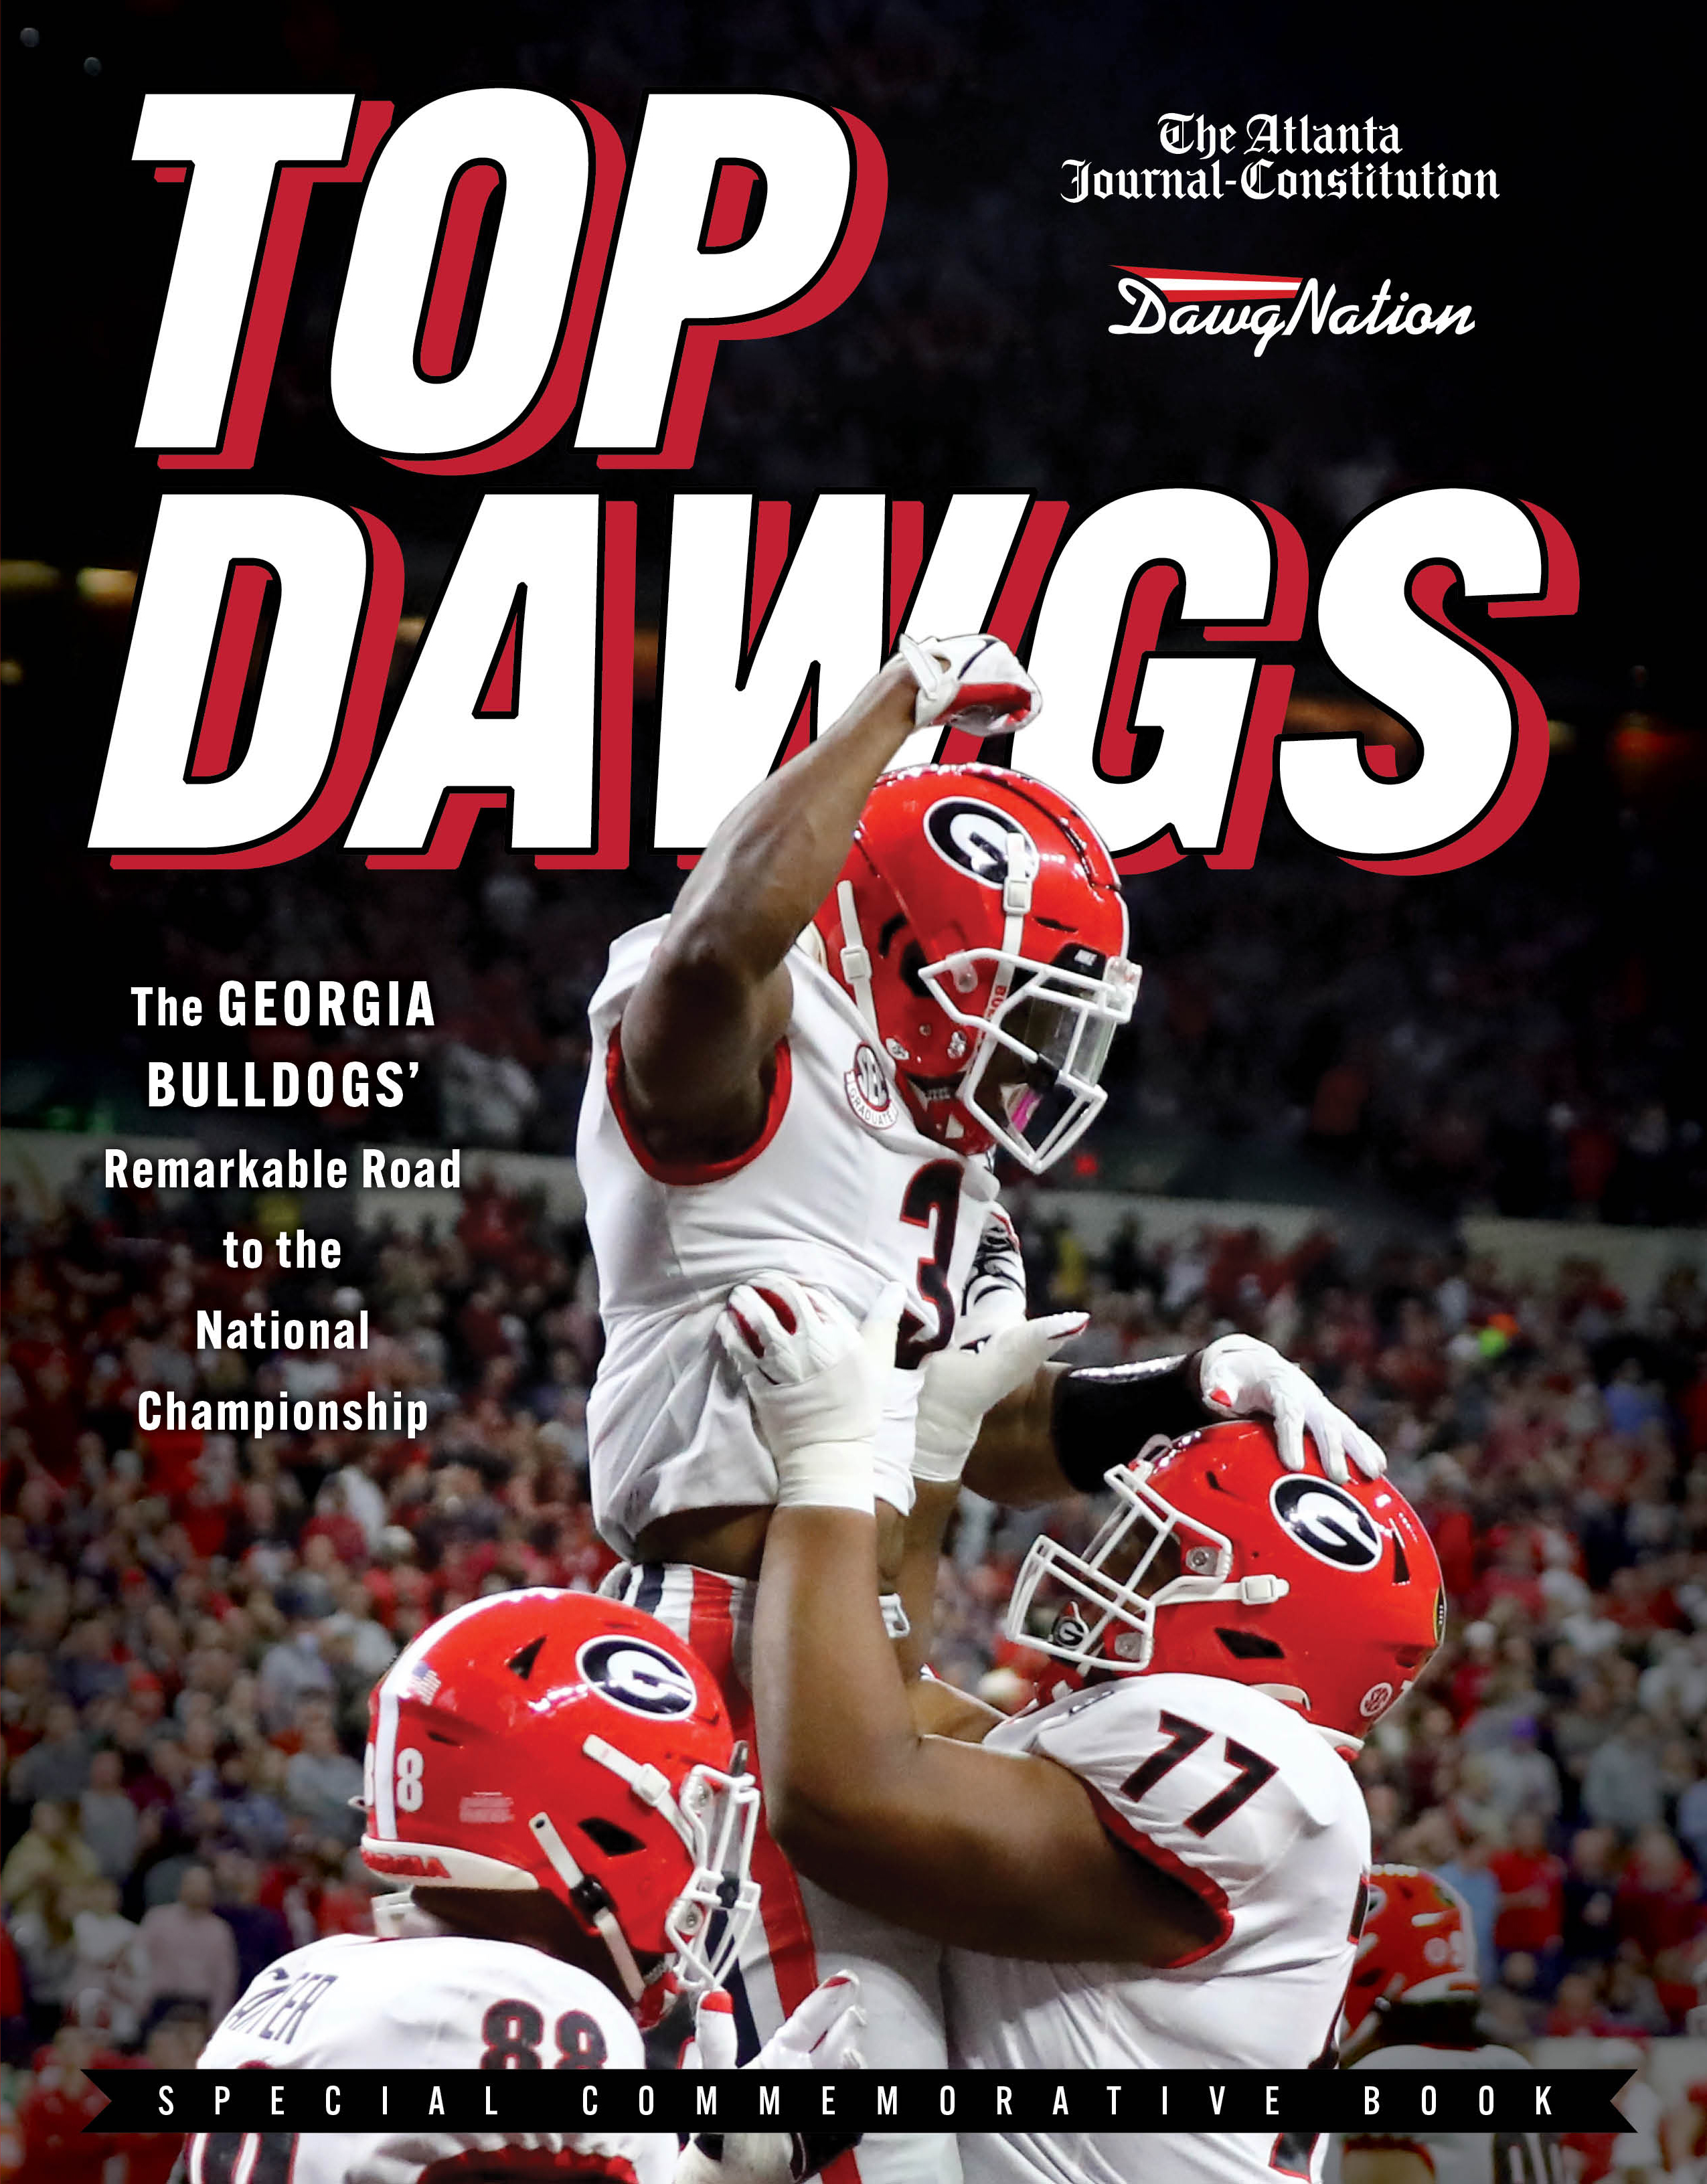 Where to find AJC pages and collectibles from the UGA game